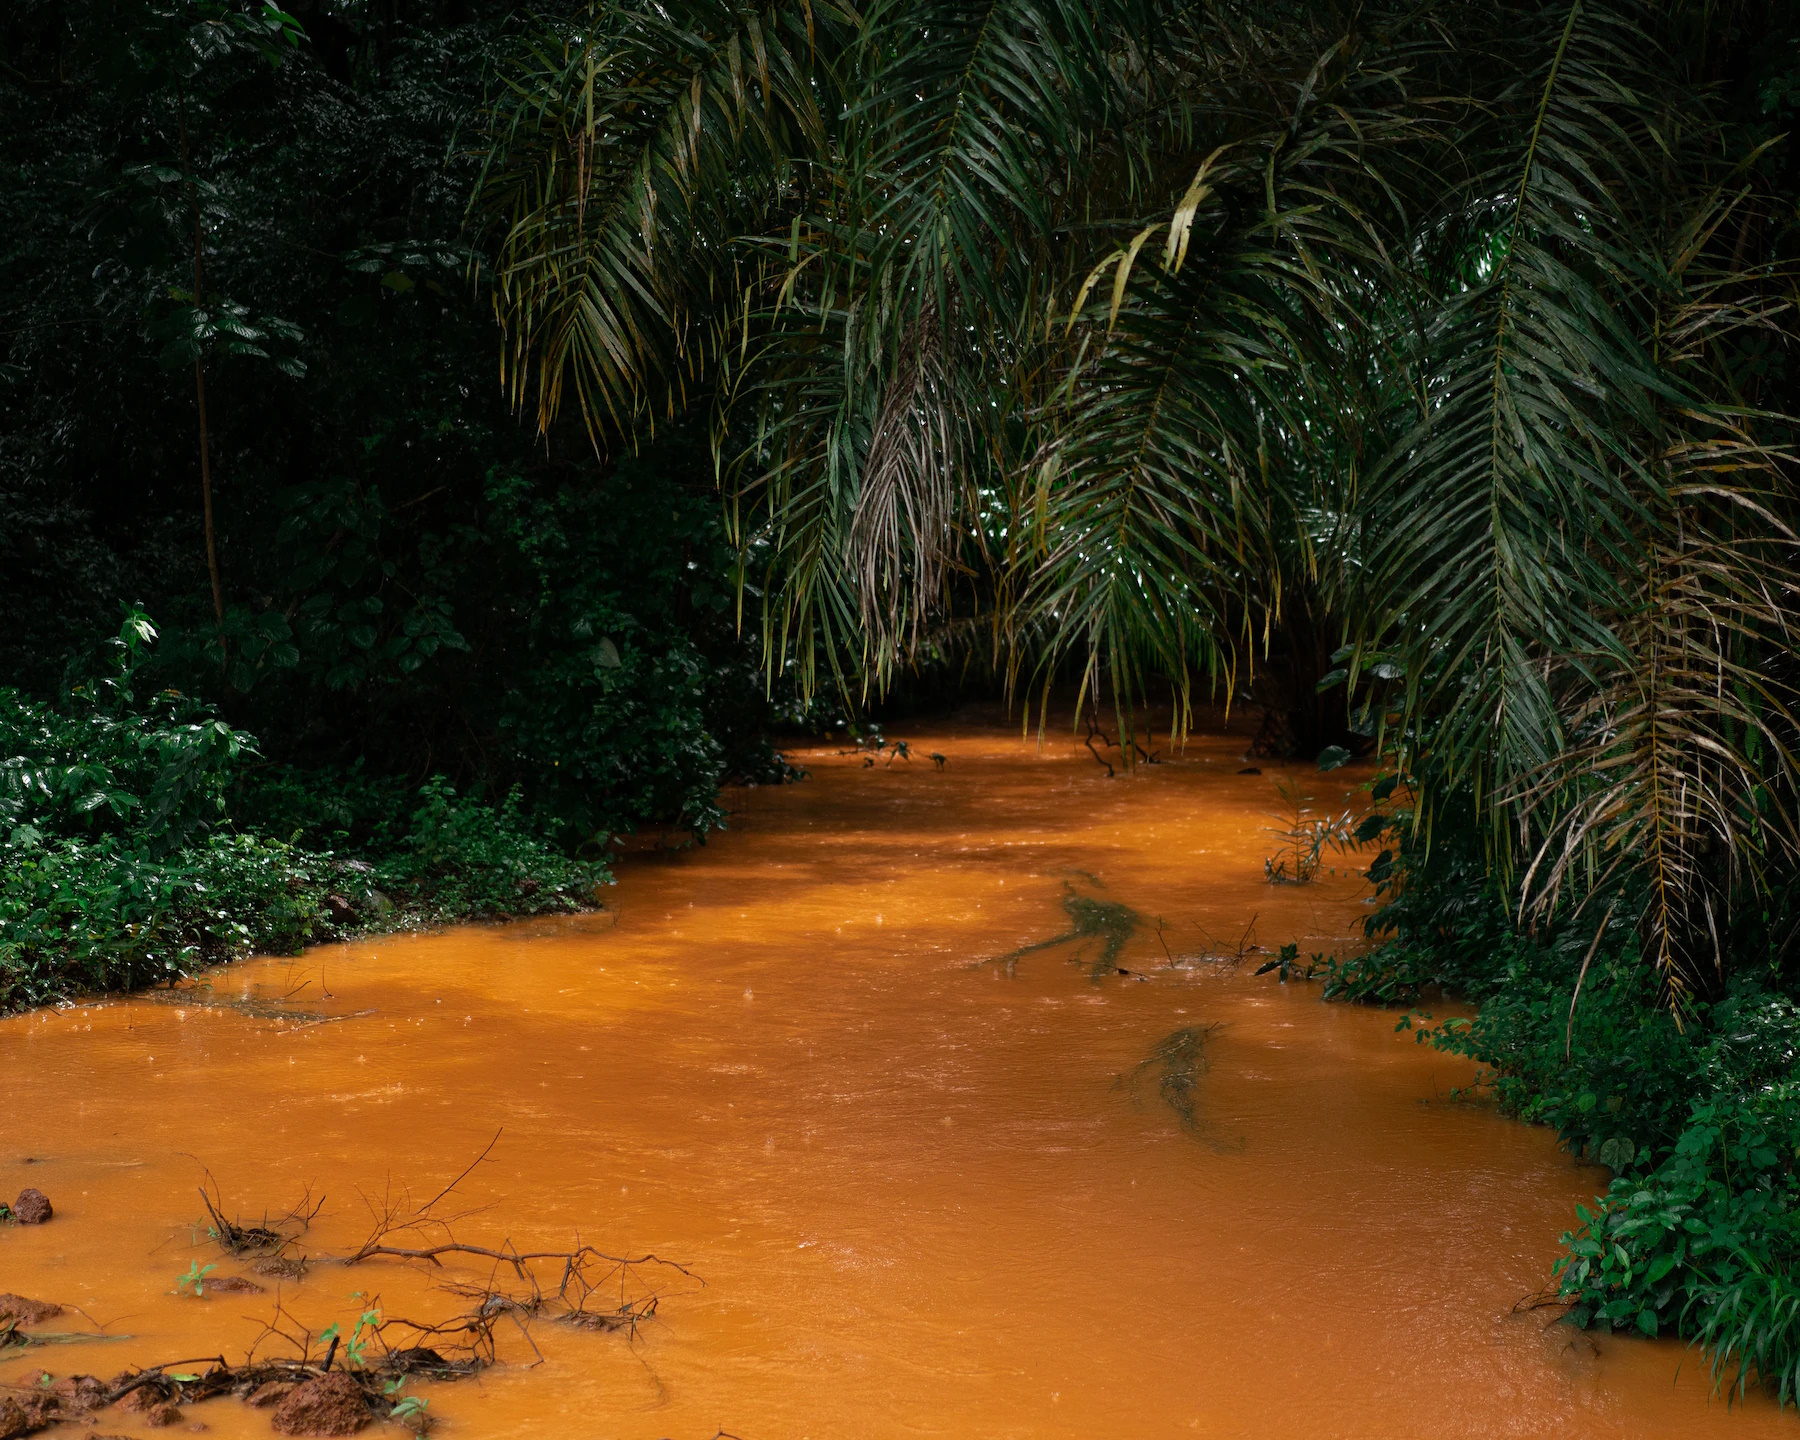 Bauxite mining operations upstream have turned the Fassalywol River in Guinea a reddish-orange color. Local women say they used to spend many pleasant hours on the river’s banks, chatting as they fished and prepared meals from the eggplant, tomatoes and peppers they grew. But they said that since CBG expanded its operations, including opening a bauxite storage site upriver in 2018, sediment has rendered the water uninhabitable for most fish and undrinkable for humans. Photo: Chloe Sharrock / MYOP / The Washington Post